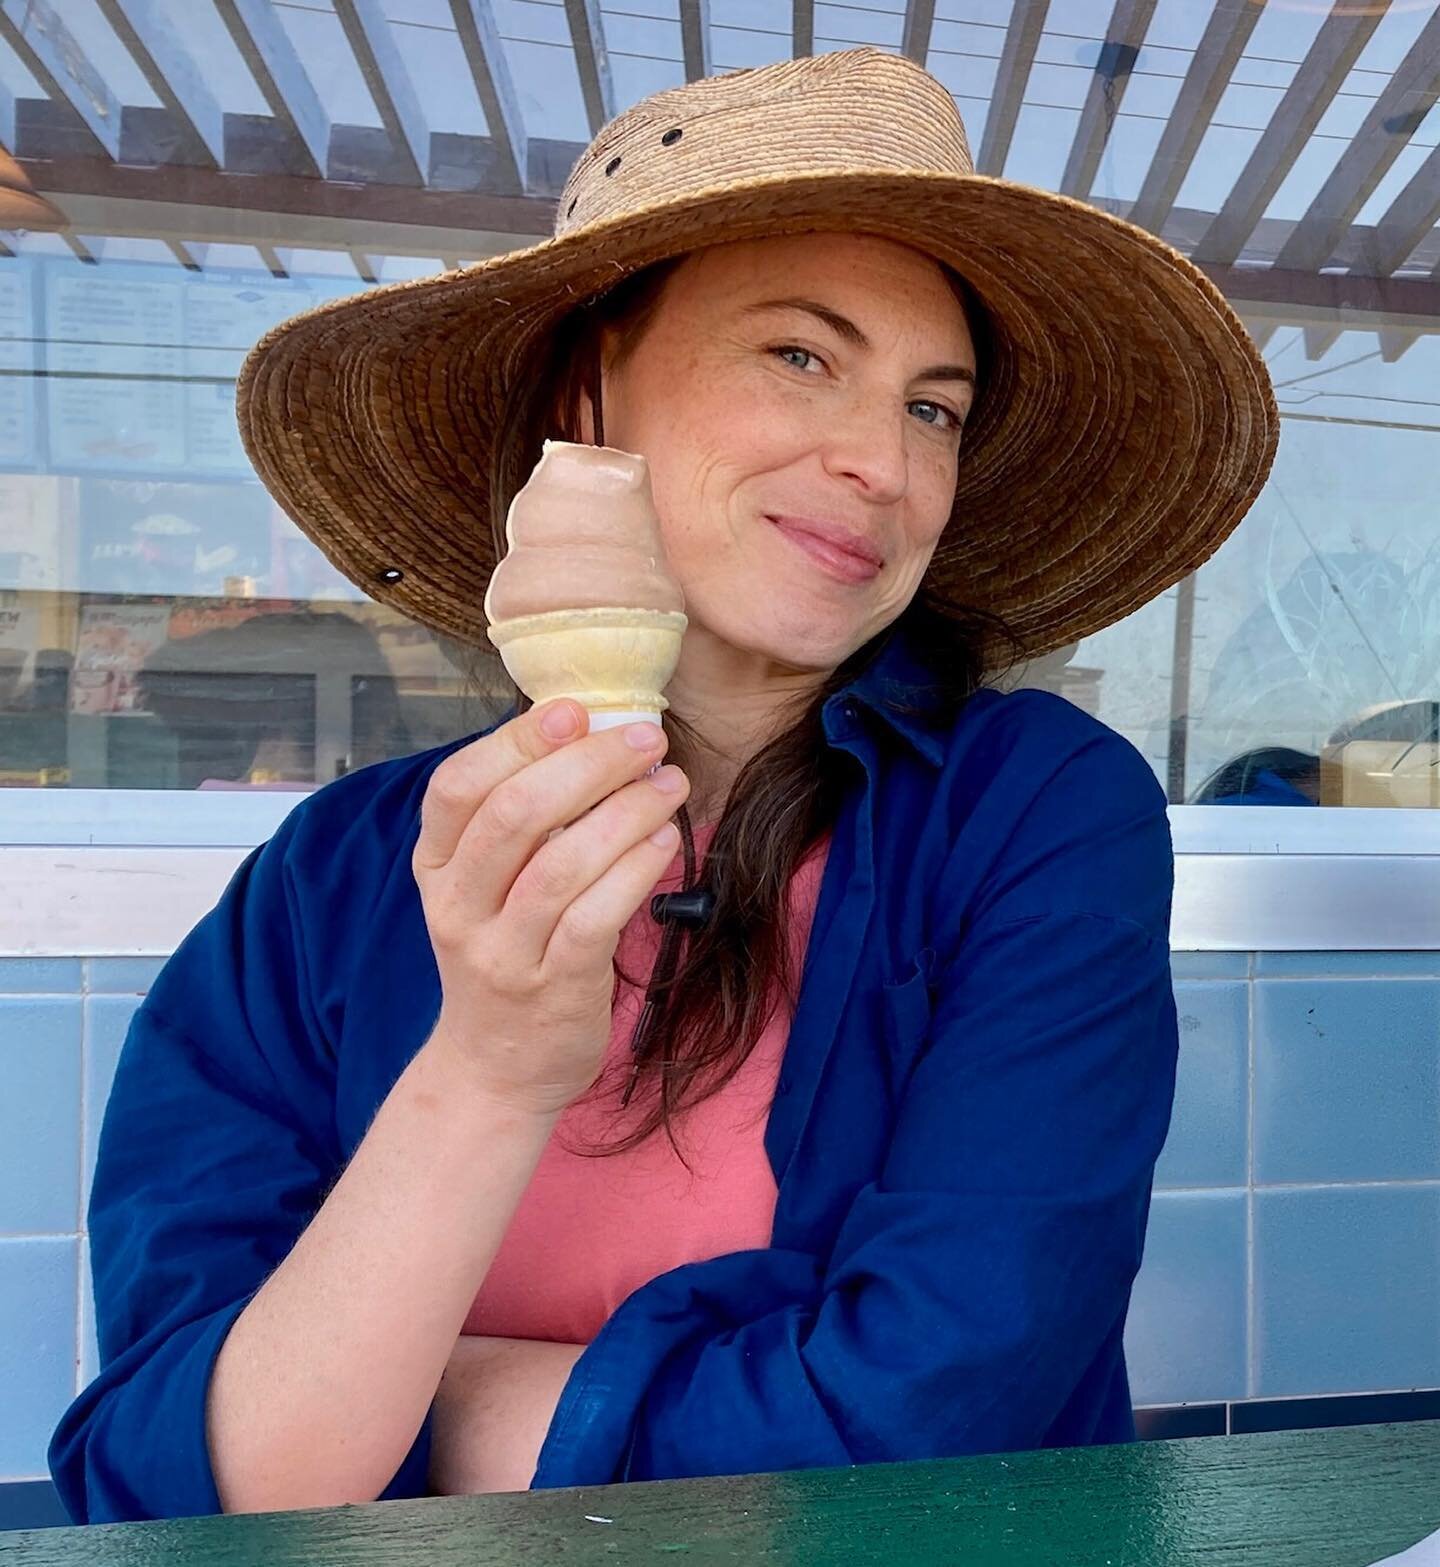 Oh hi. Can I tell you something? I swoon for this photo. I adore it. It makes my heart smile. This is me in my element. It&rsquo;s a beautiful warm California day. I&rsquo;m with family. I&rsquo;m enjoying frozen custard which is just vastly superior